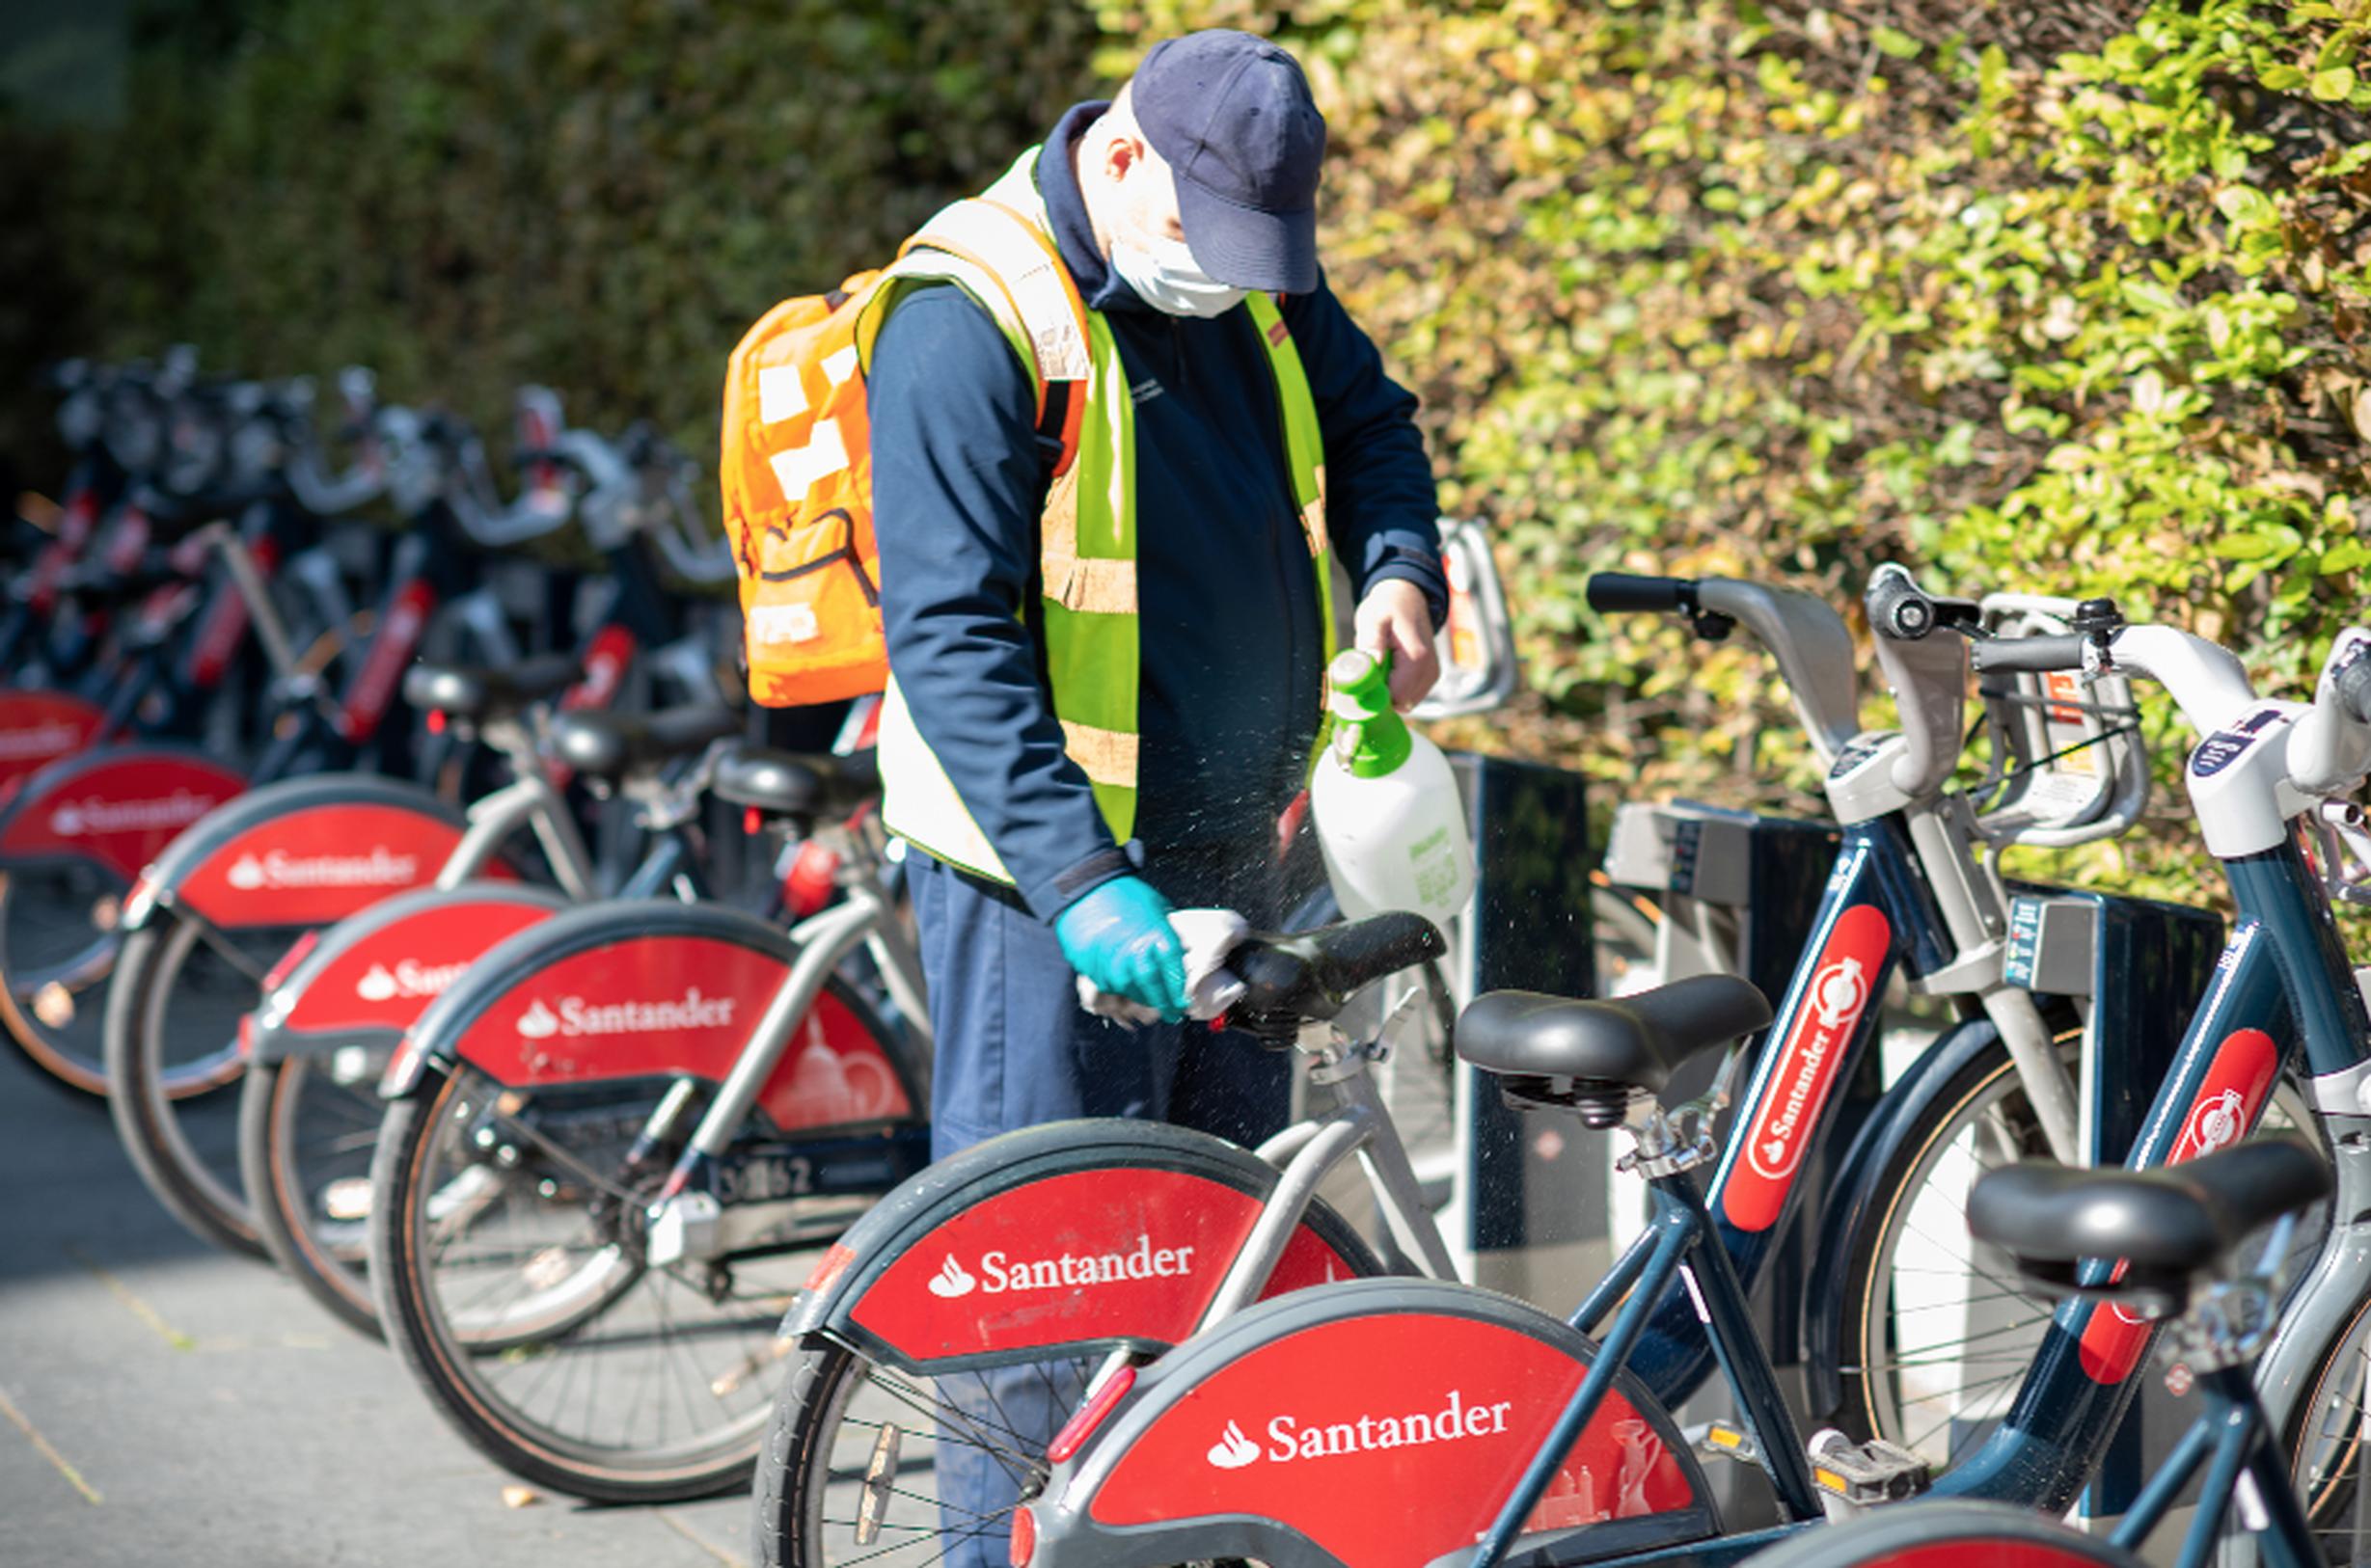 Three new Santander Cycles docking stations have been opened along the route